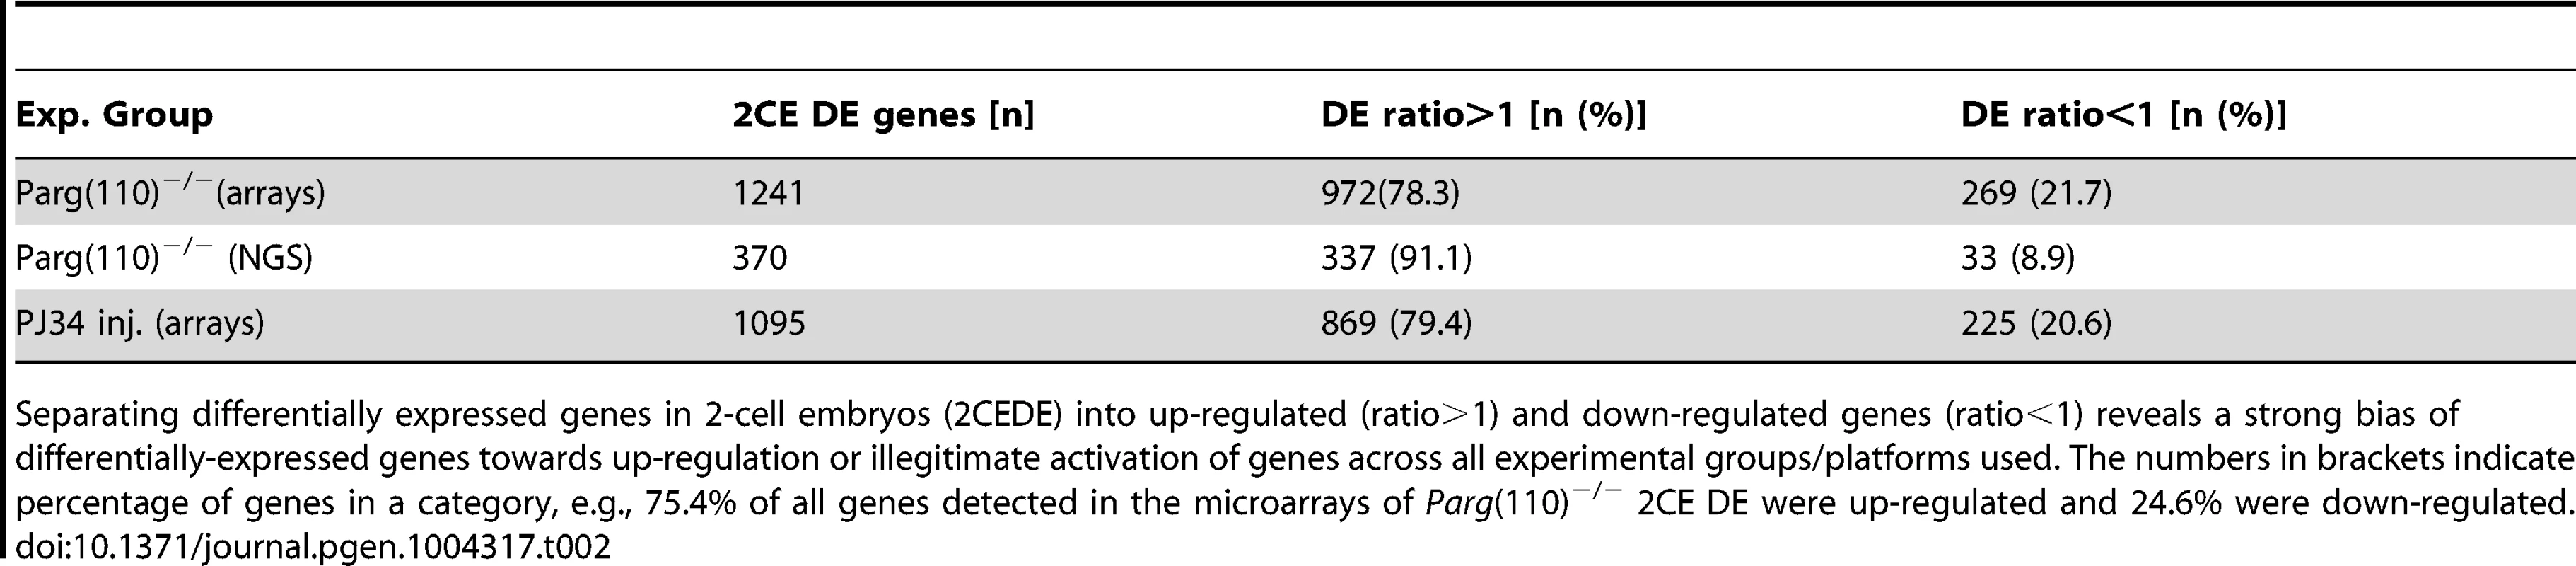 Genes with differential expression in 2-cell embryos.